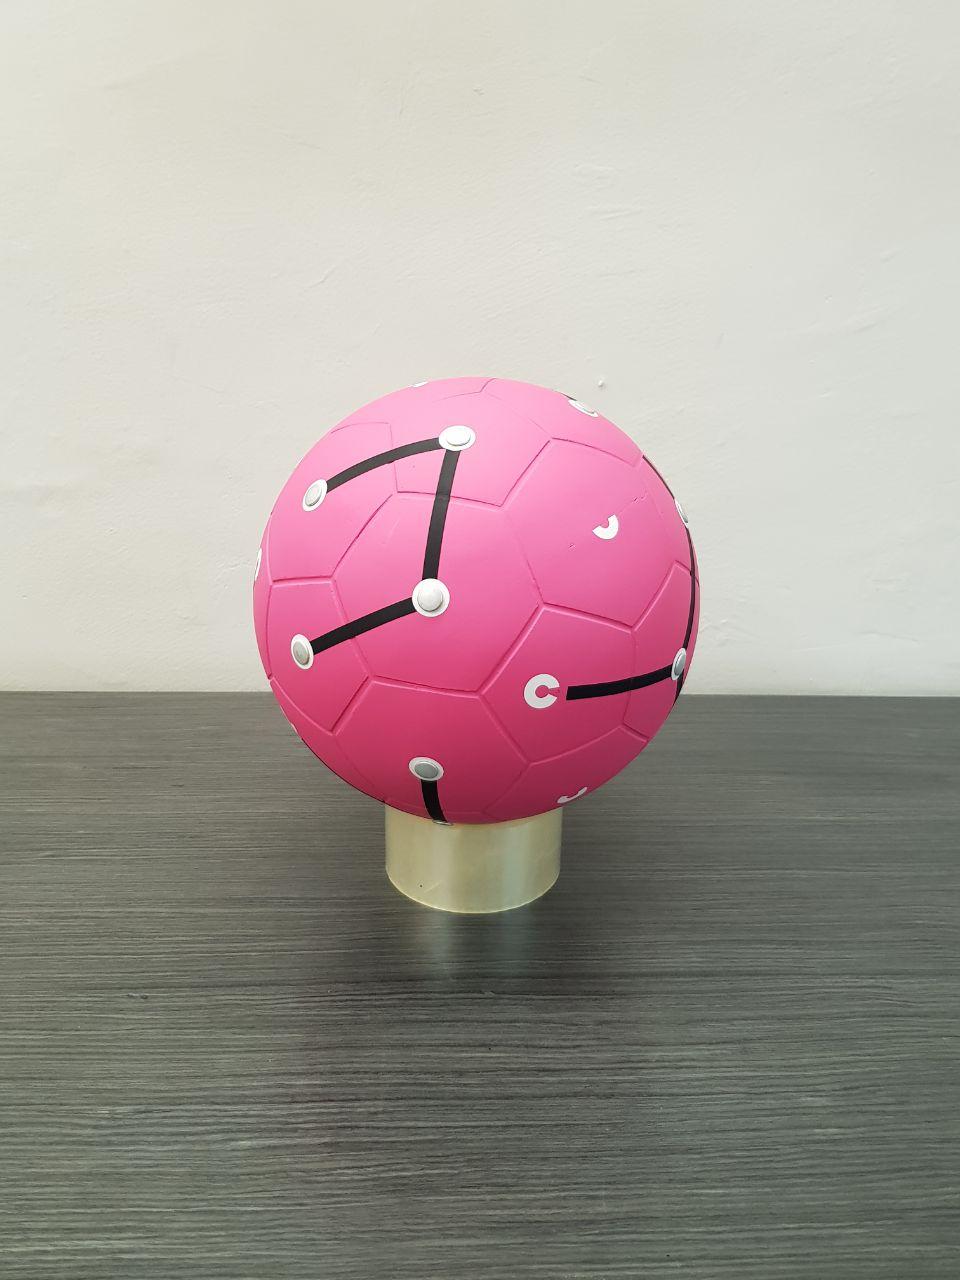 Lithoballs made in 2016 with the support of FIFA, in an exhibition project with several invited artists to support aid foundations for children with disabilities, this ball is part of a series of 10 pieces, this piece being 10/10.